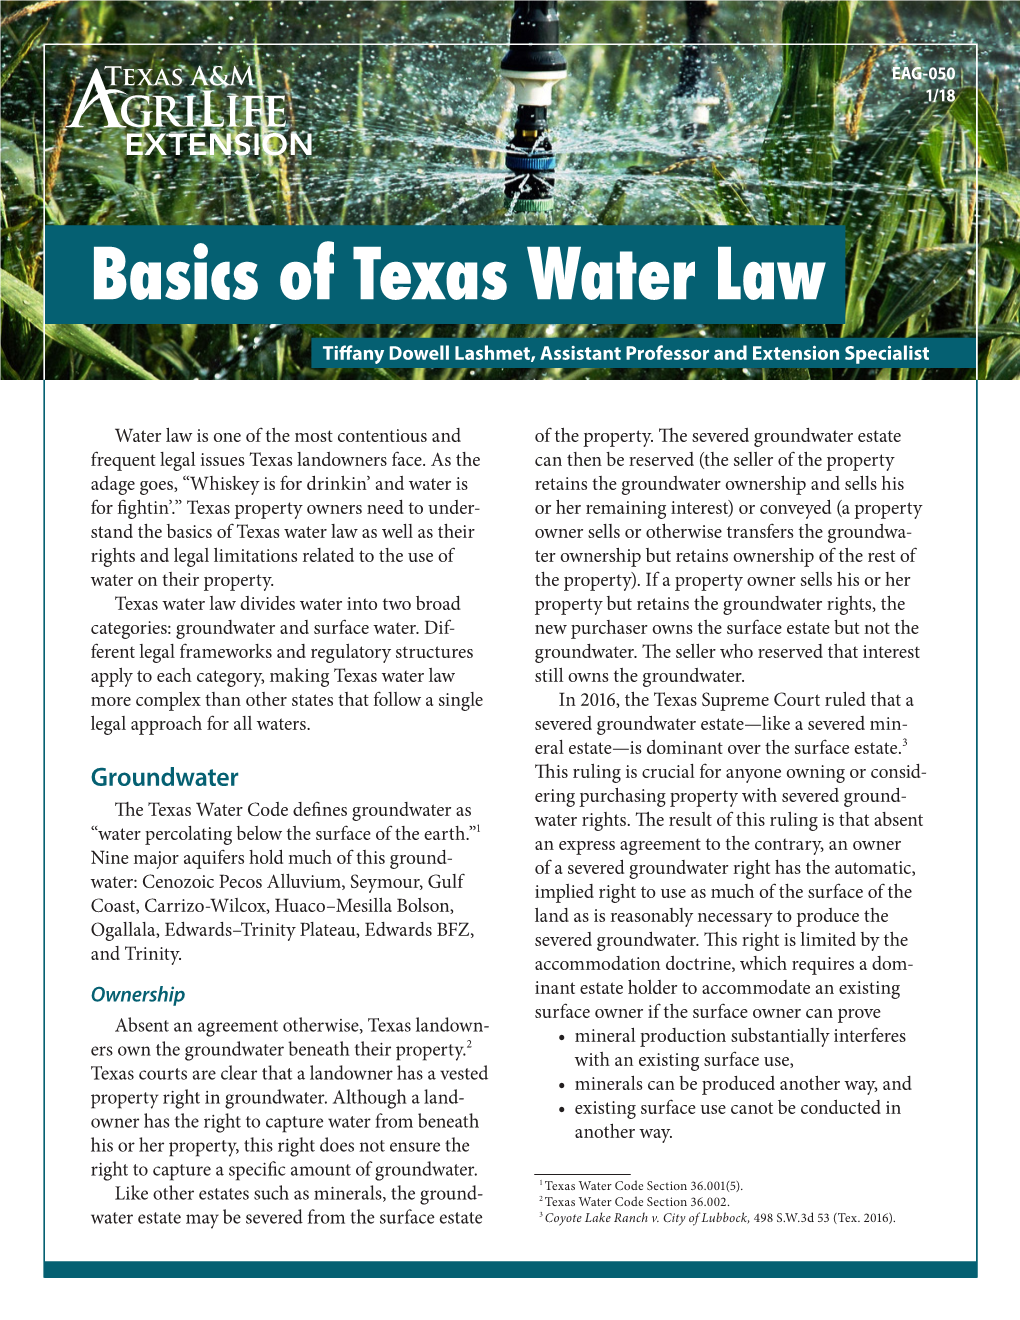 Basics of Texas Water Law